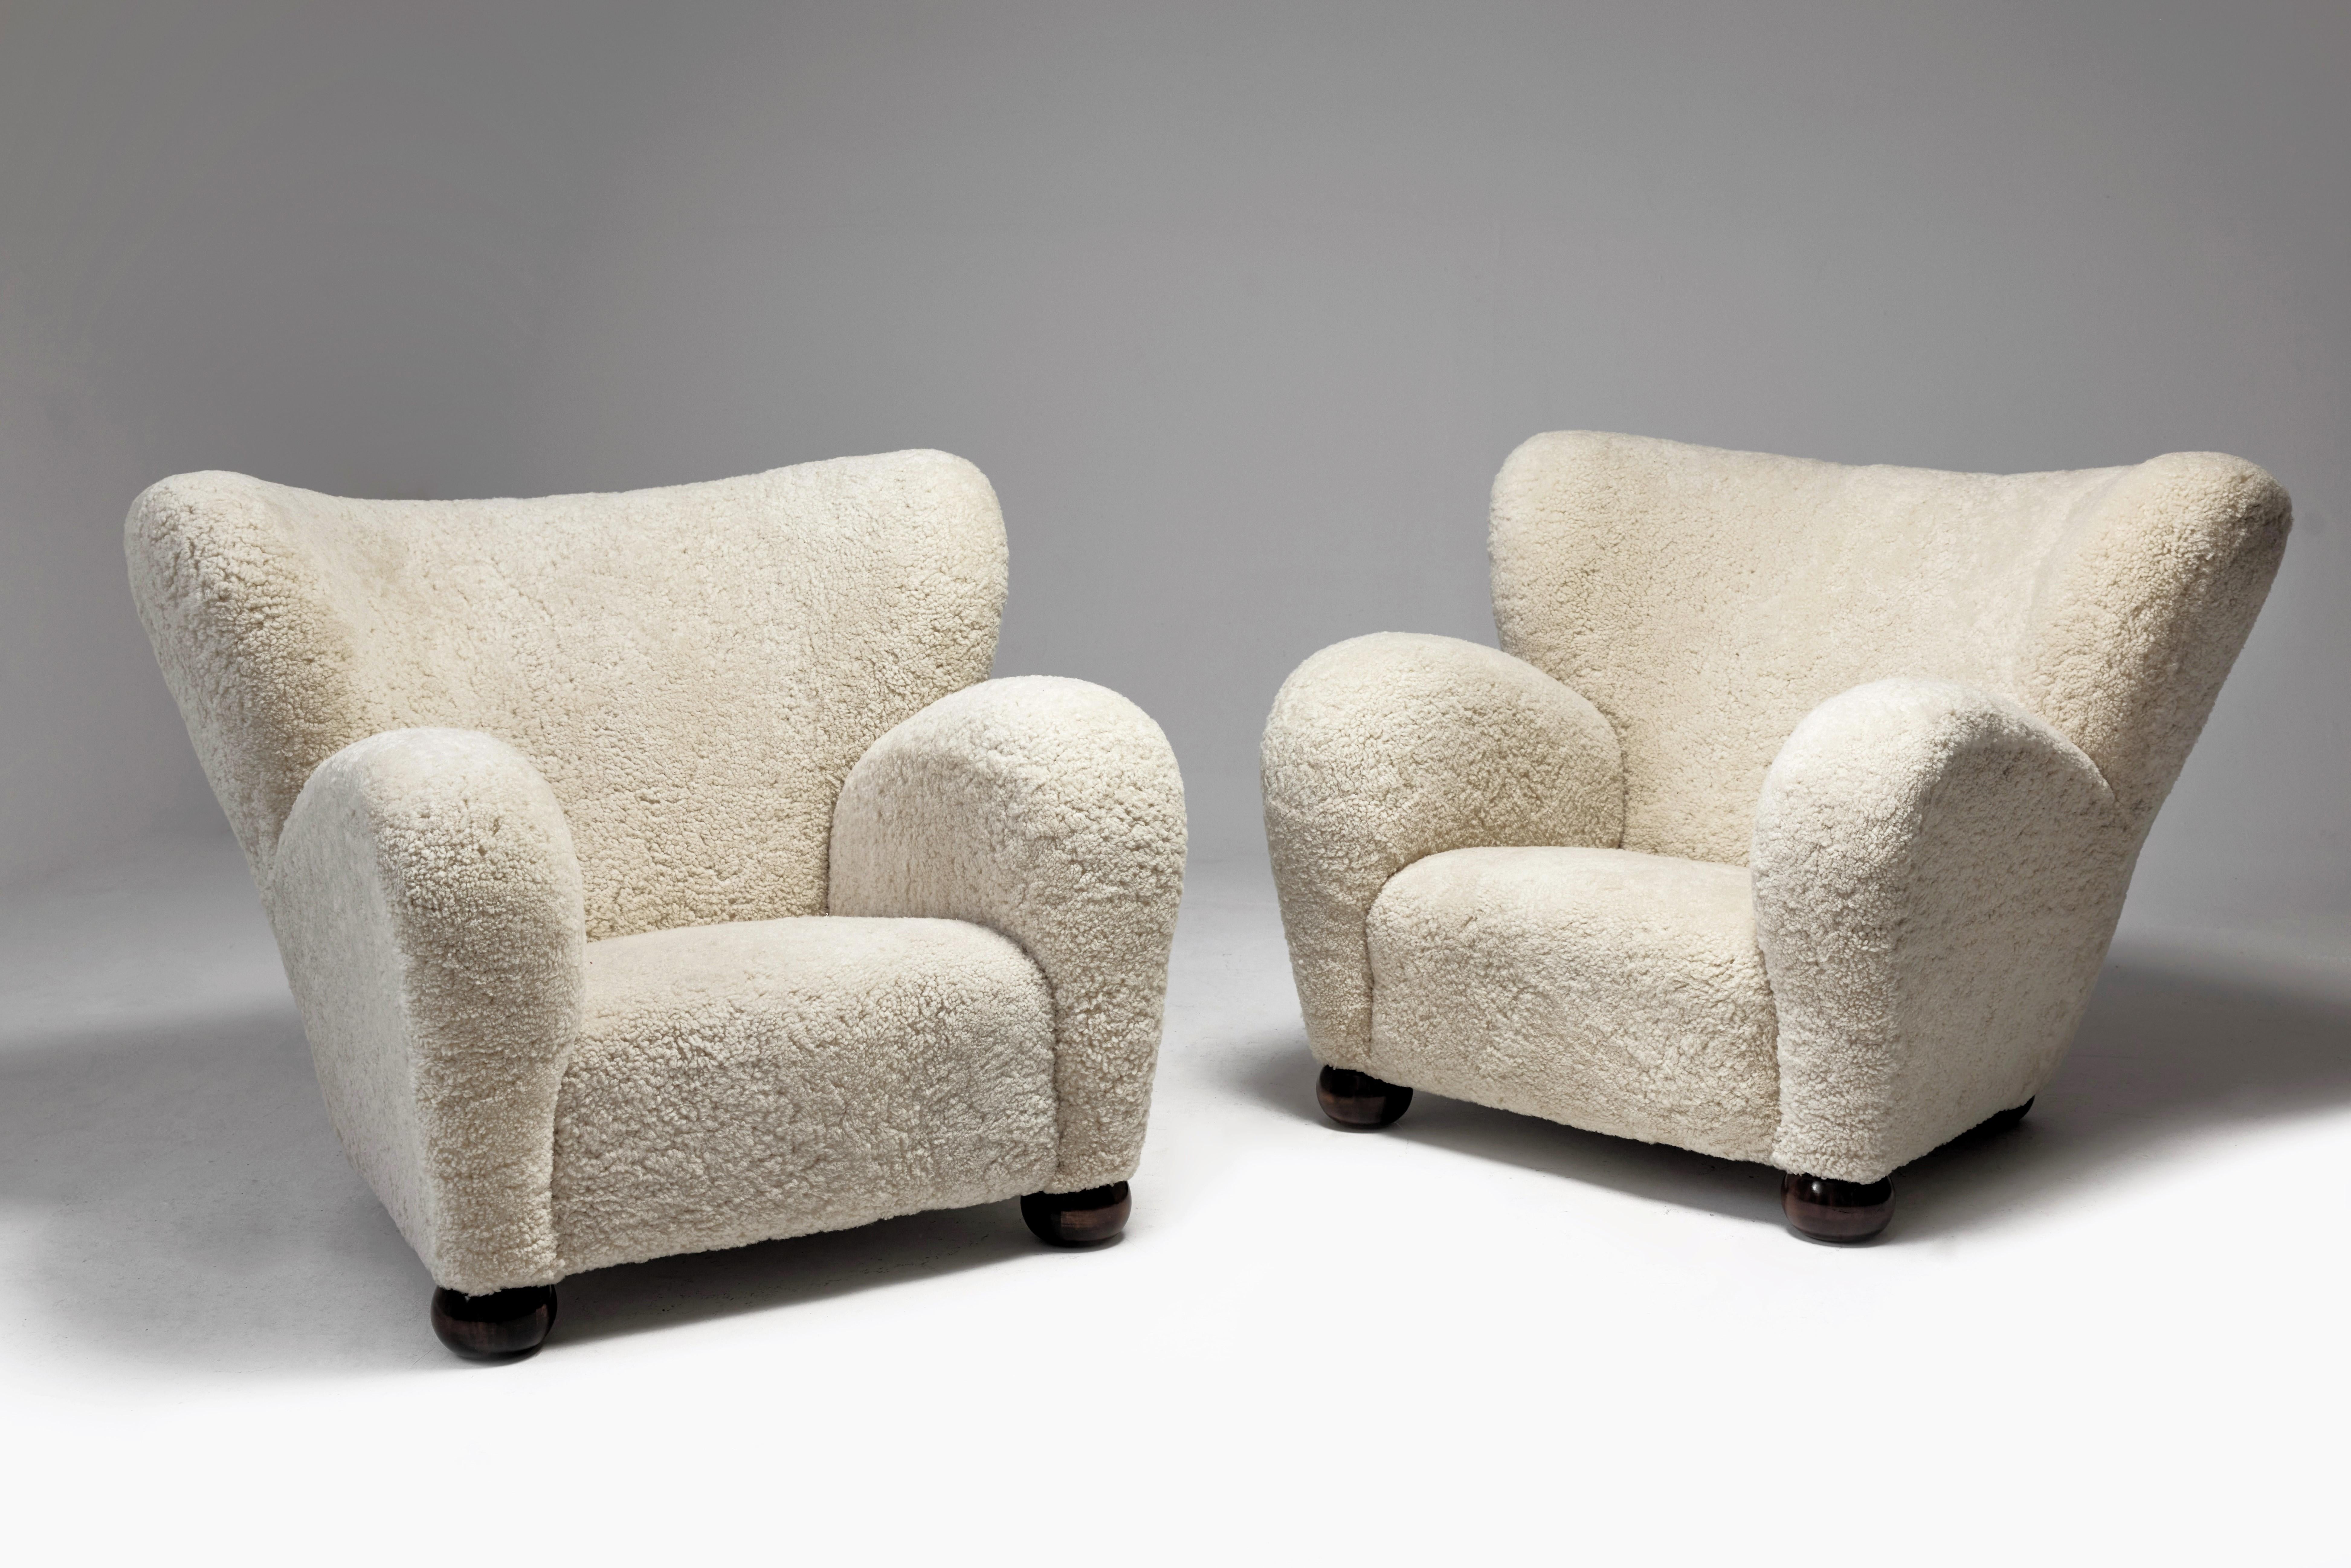 Pair of Marta Blomstedt  Sheepskin Armchairs for the Hotel Aulanko, Finland, 1930s.

In 1936, architects Matti Lampen and Märta Blomstedt were commissioned to design the Aulanko Hotel in Hämeenlinna, Finland. This hotel was in its time a luxury